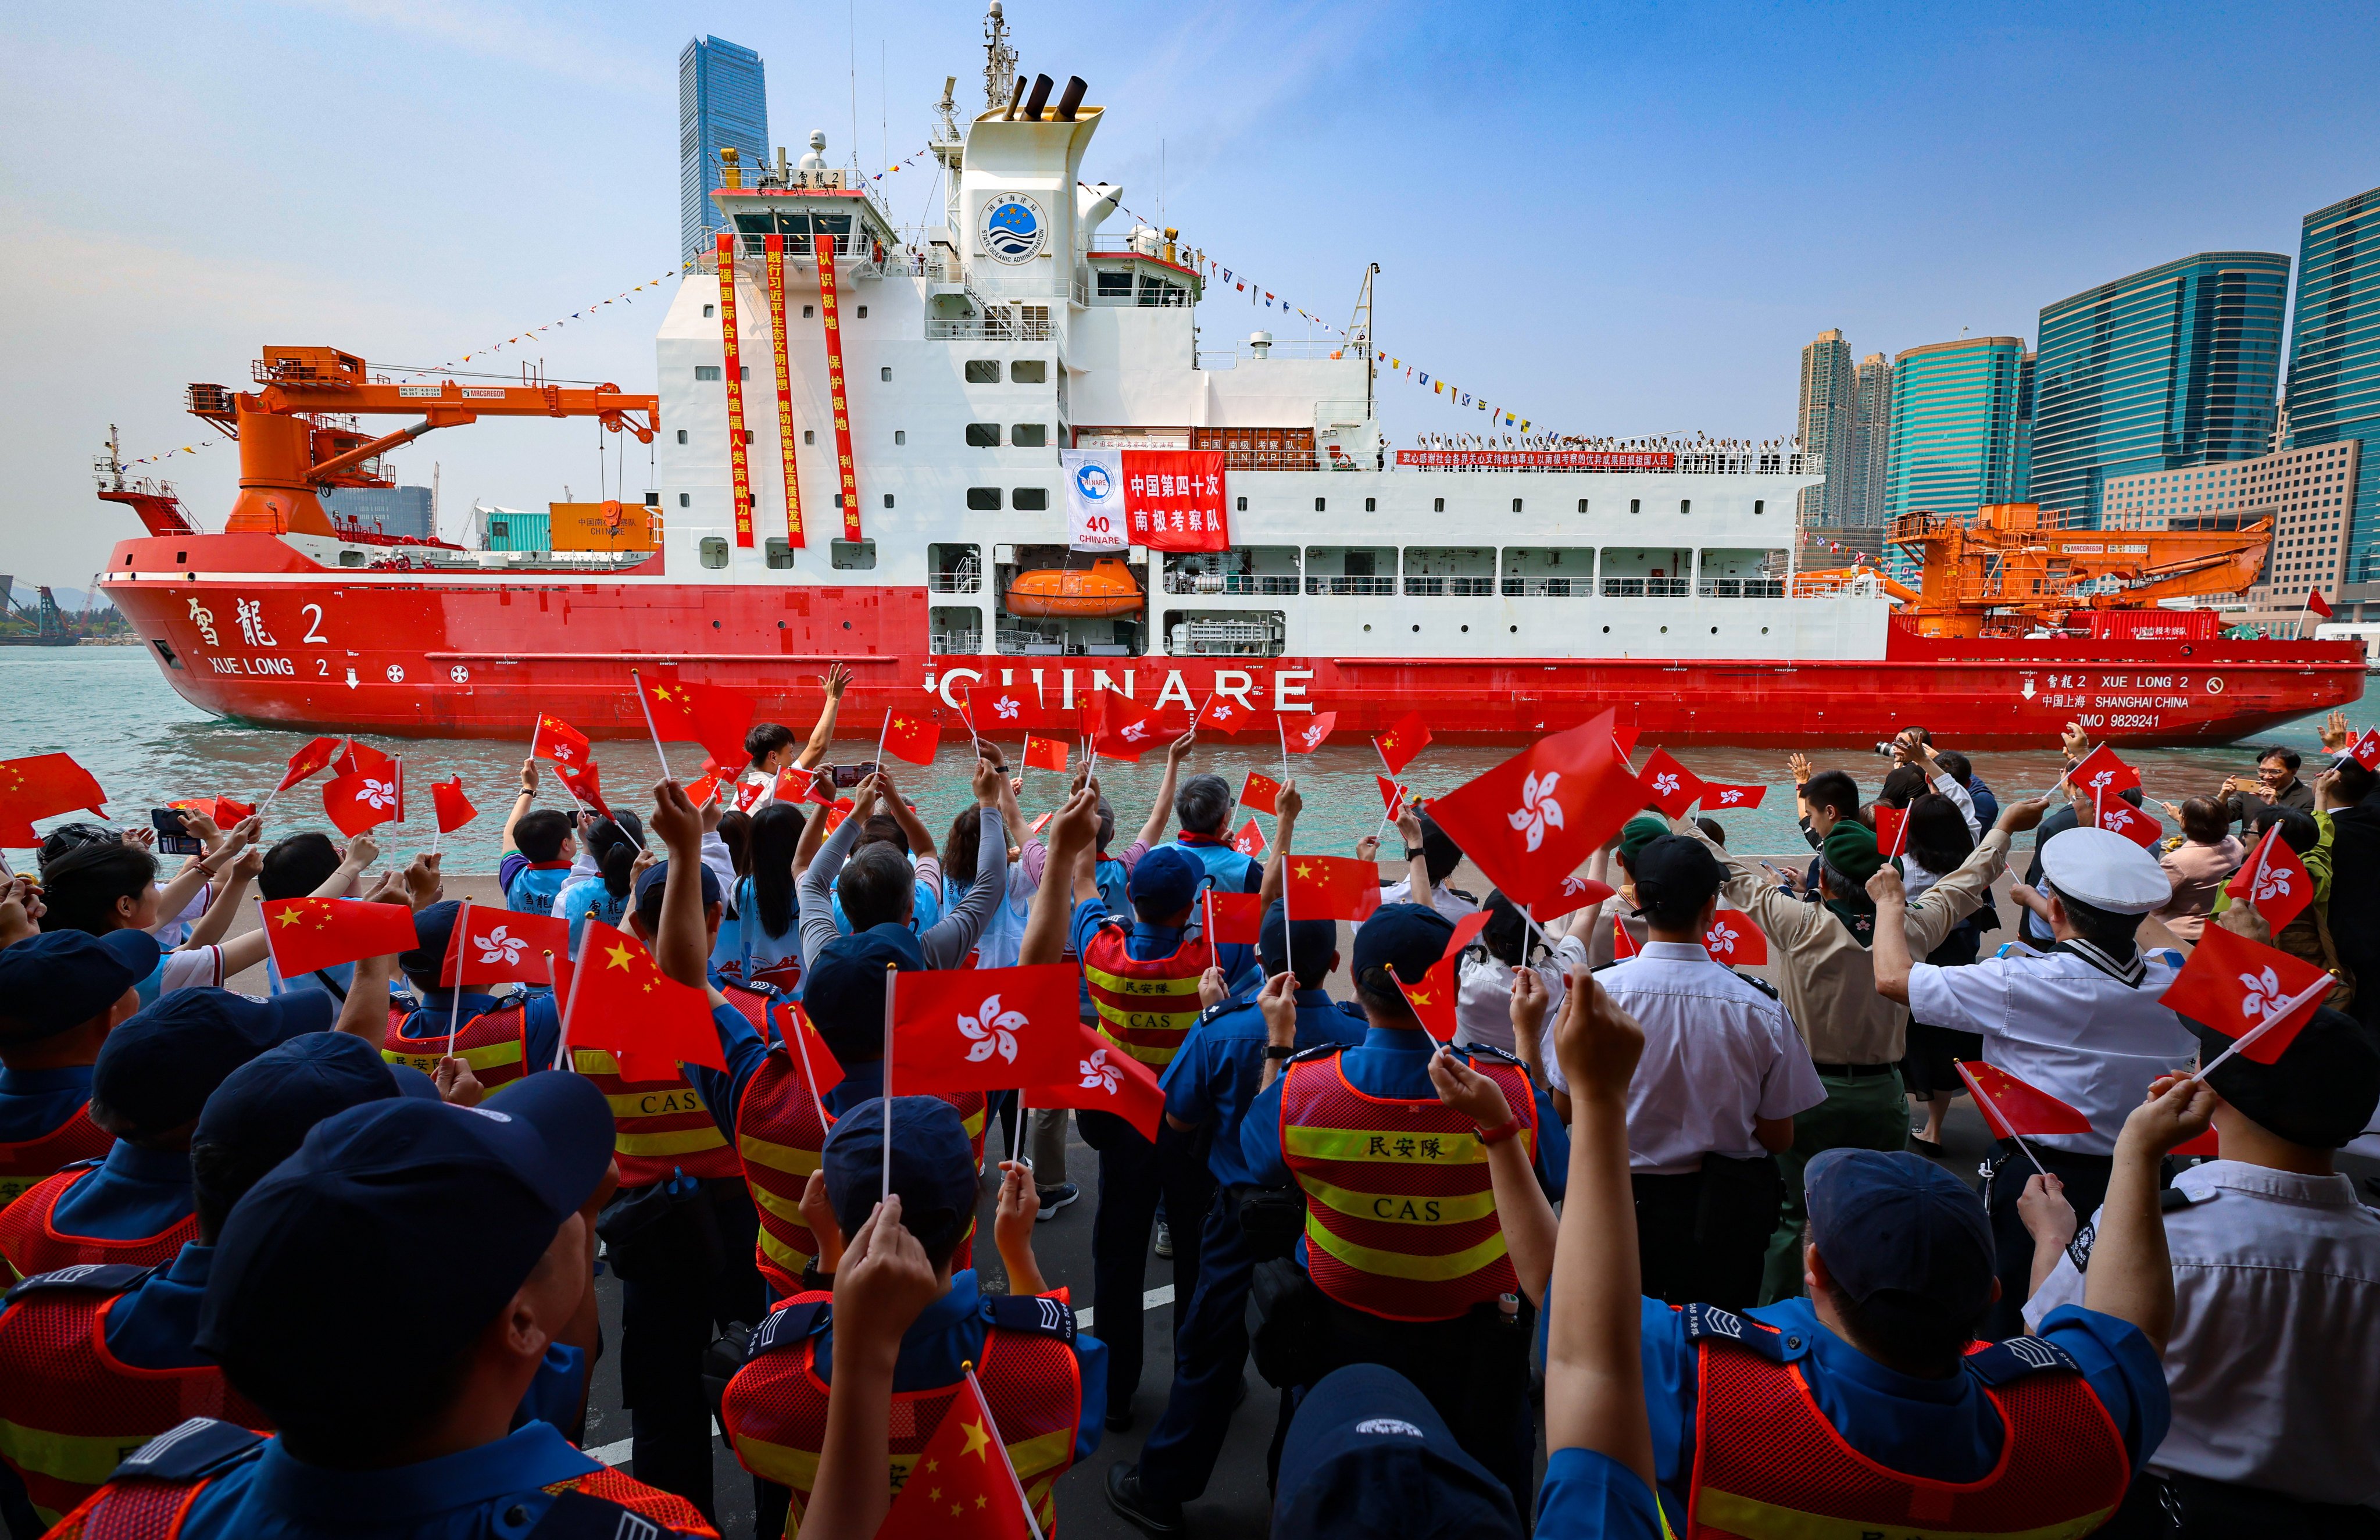 The Xue Long 2 gets a warm welcome in Tsim Sha Tsui. The vessel has departed the city for Shanghai. Photo: Dickson Lee